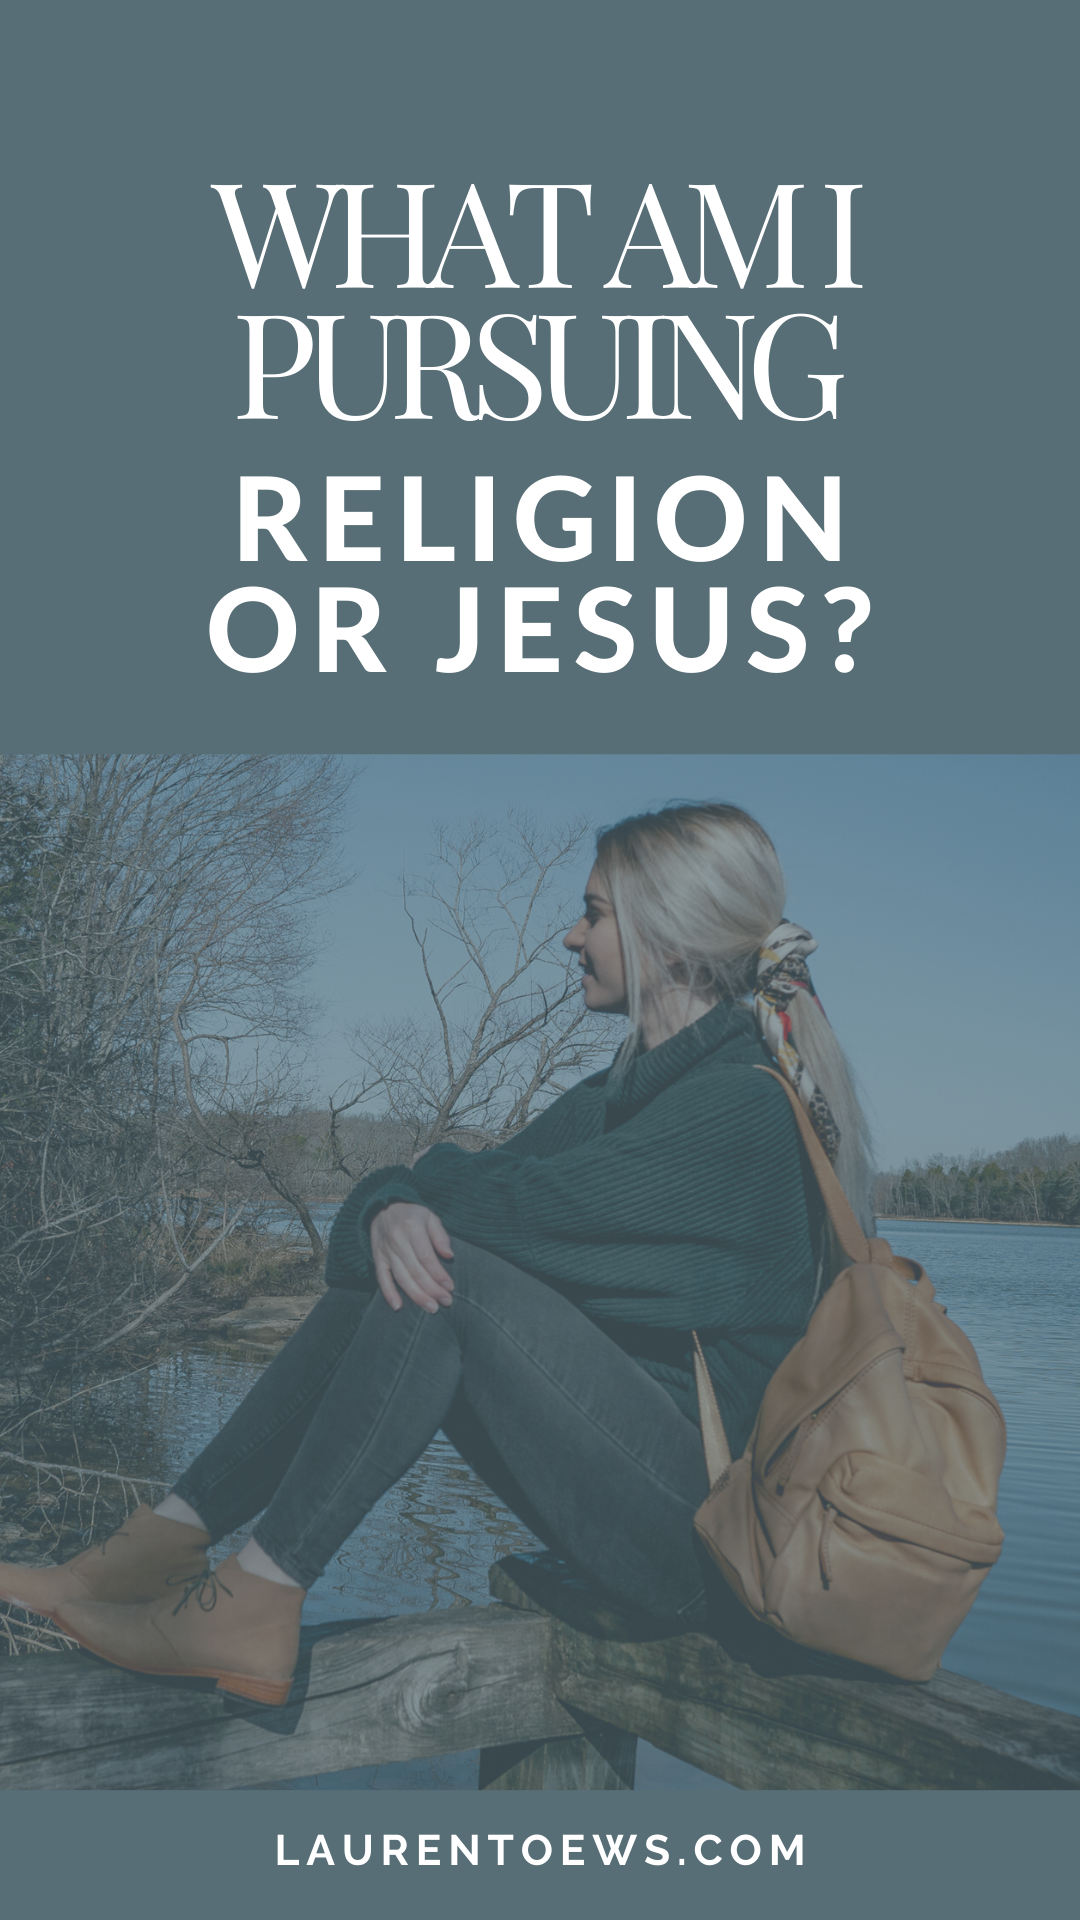 What am I pursuing? My religion or Jesus?